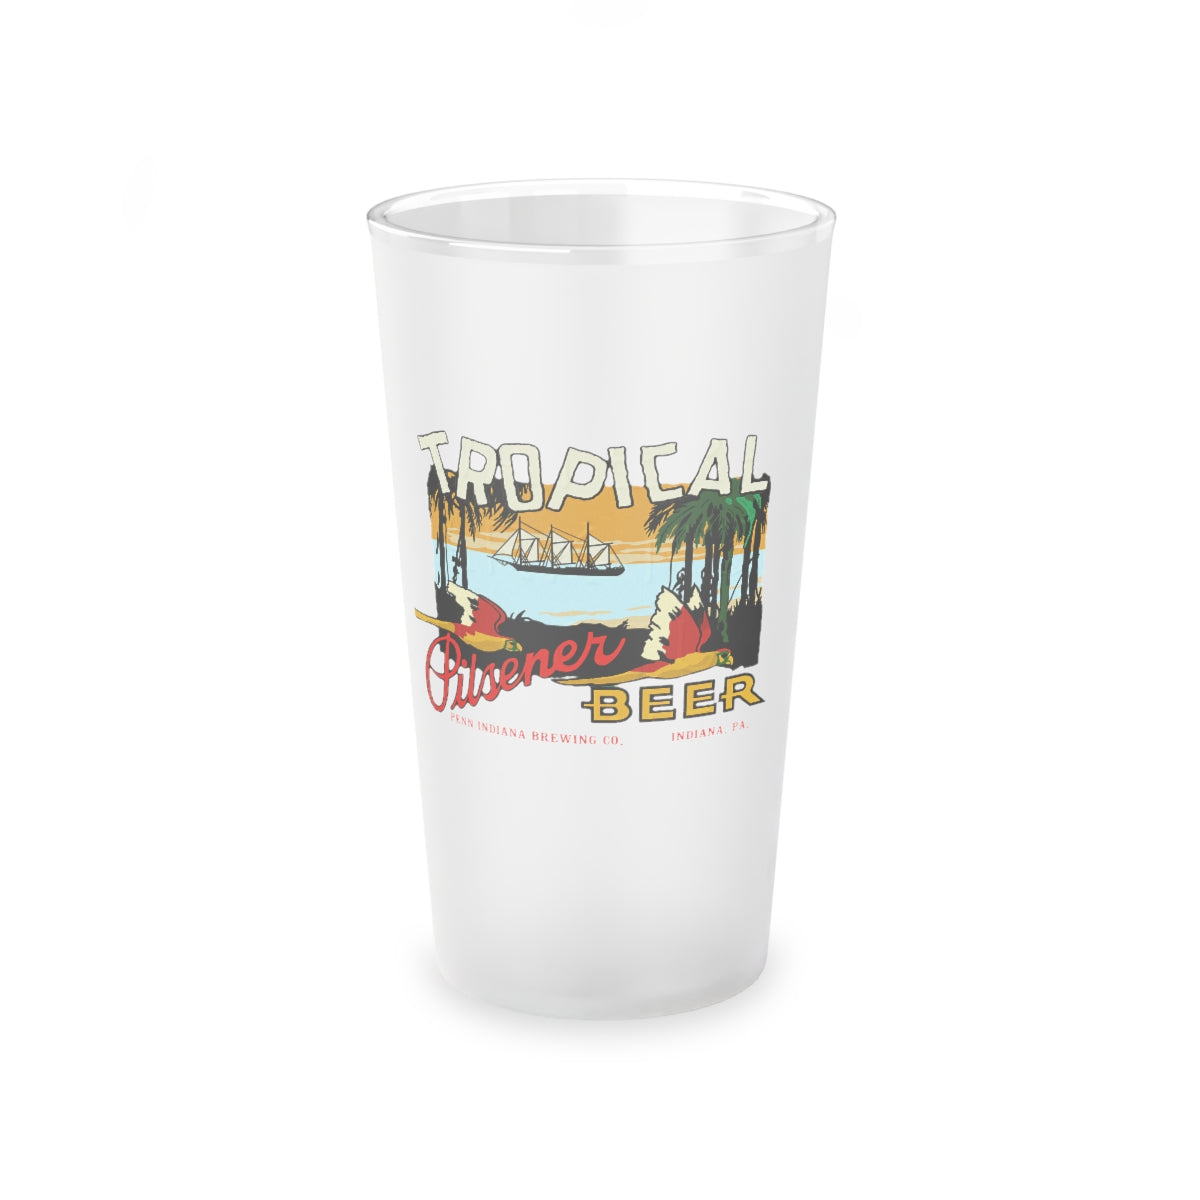 TROPICAL PILSNER BEER - Indiana, PA - Frosted Pint Glass, 16oz - Yinzylvania